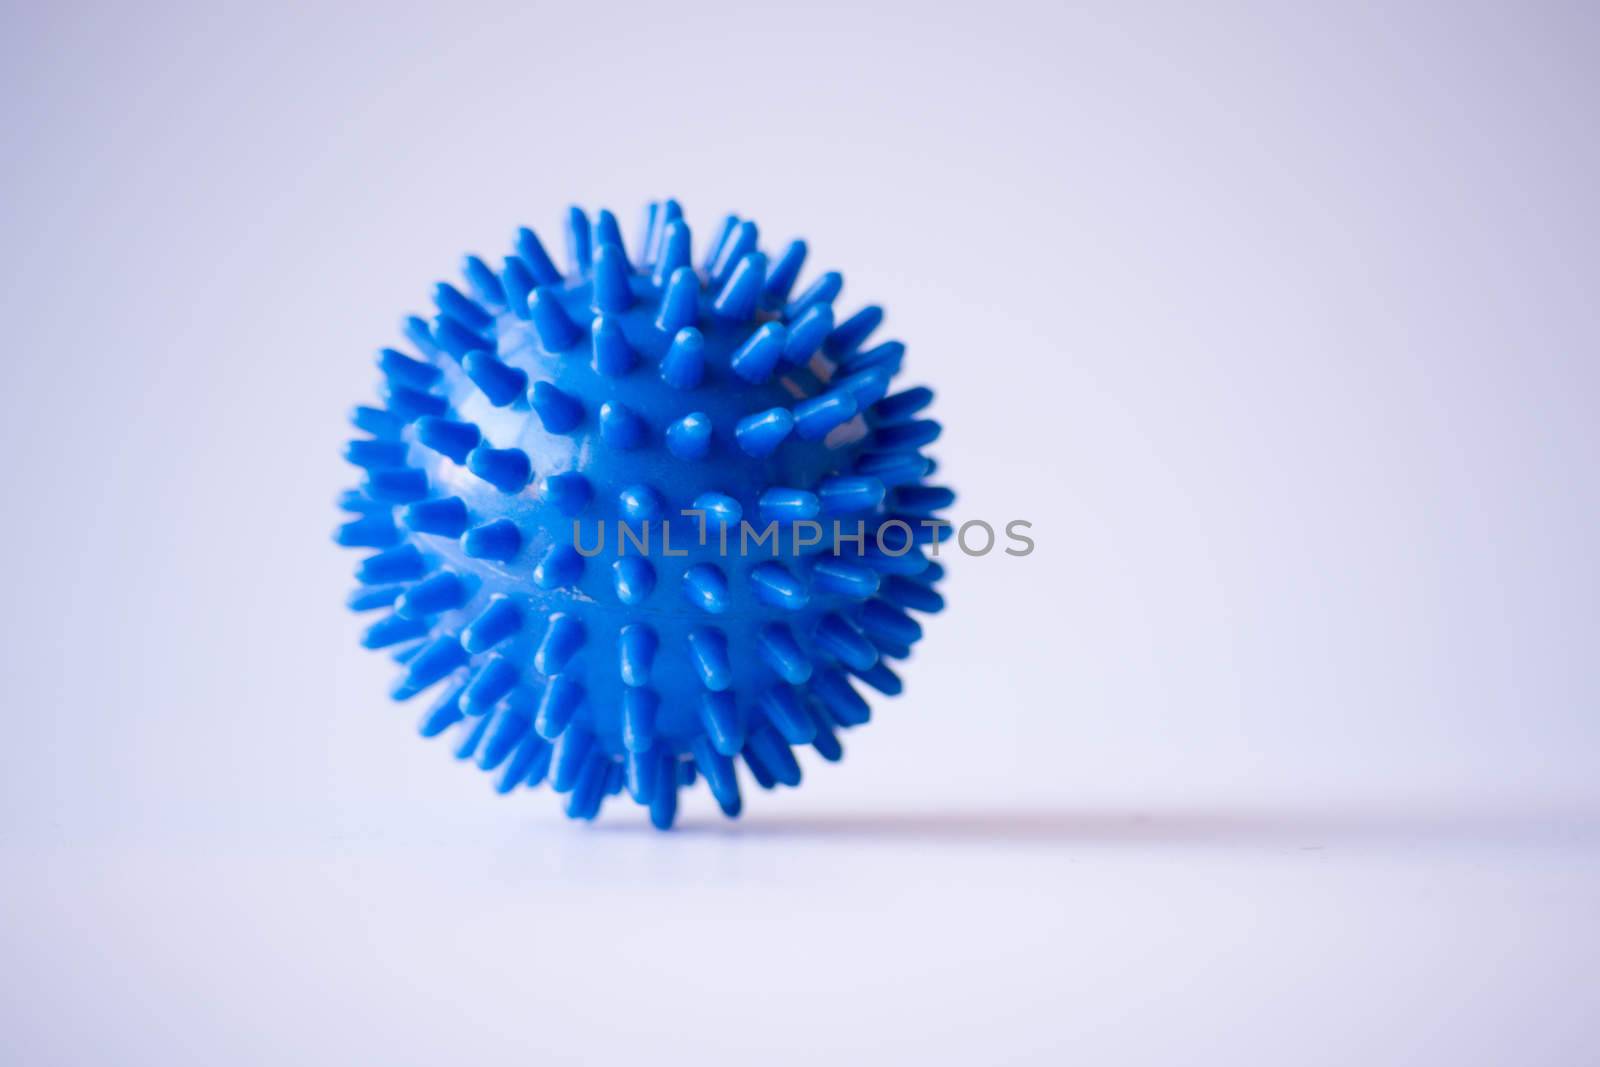 This spiky ball is to be rolled along your body to stimulate blood flow and muscle relaxation